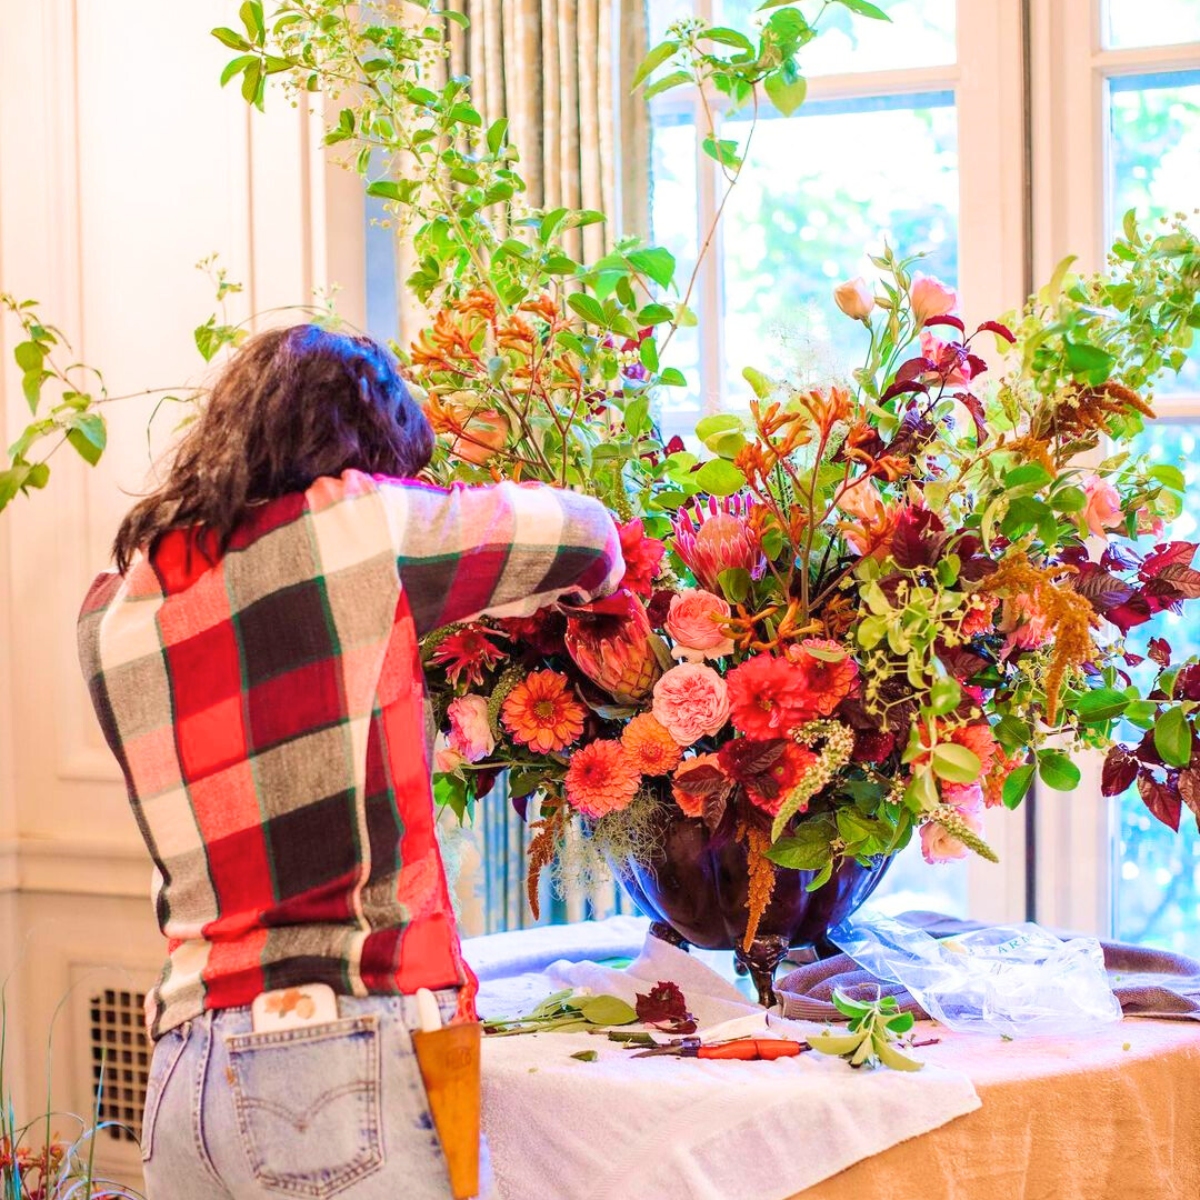 Floral design techniques at the Slow Flowers Summit